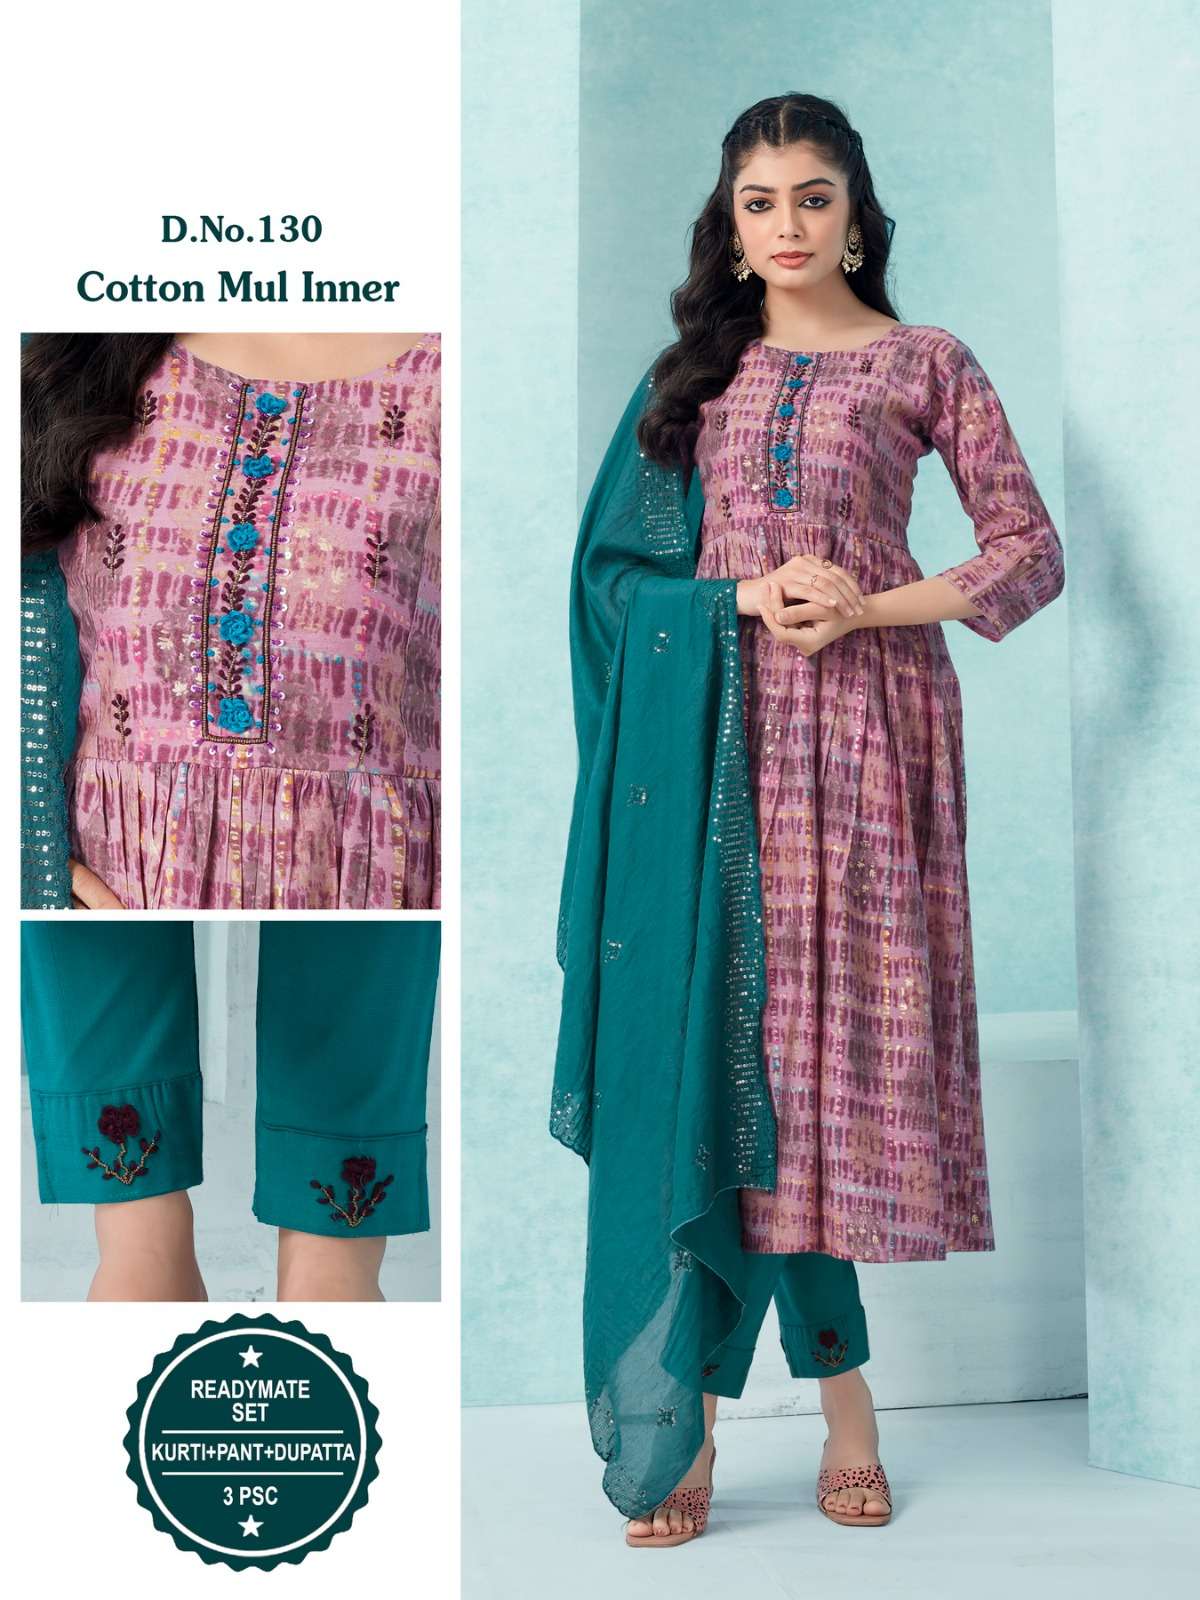 COLOURPIX MODAL CHANDERI KURTI WITH BOTTOM AND DUPATTA BY S3FOREVER BRAND WHOLESALR AND DELER